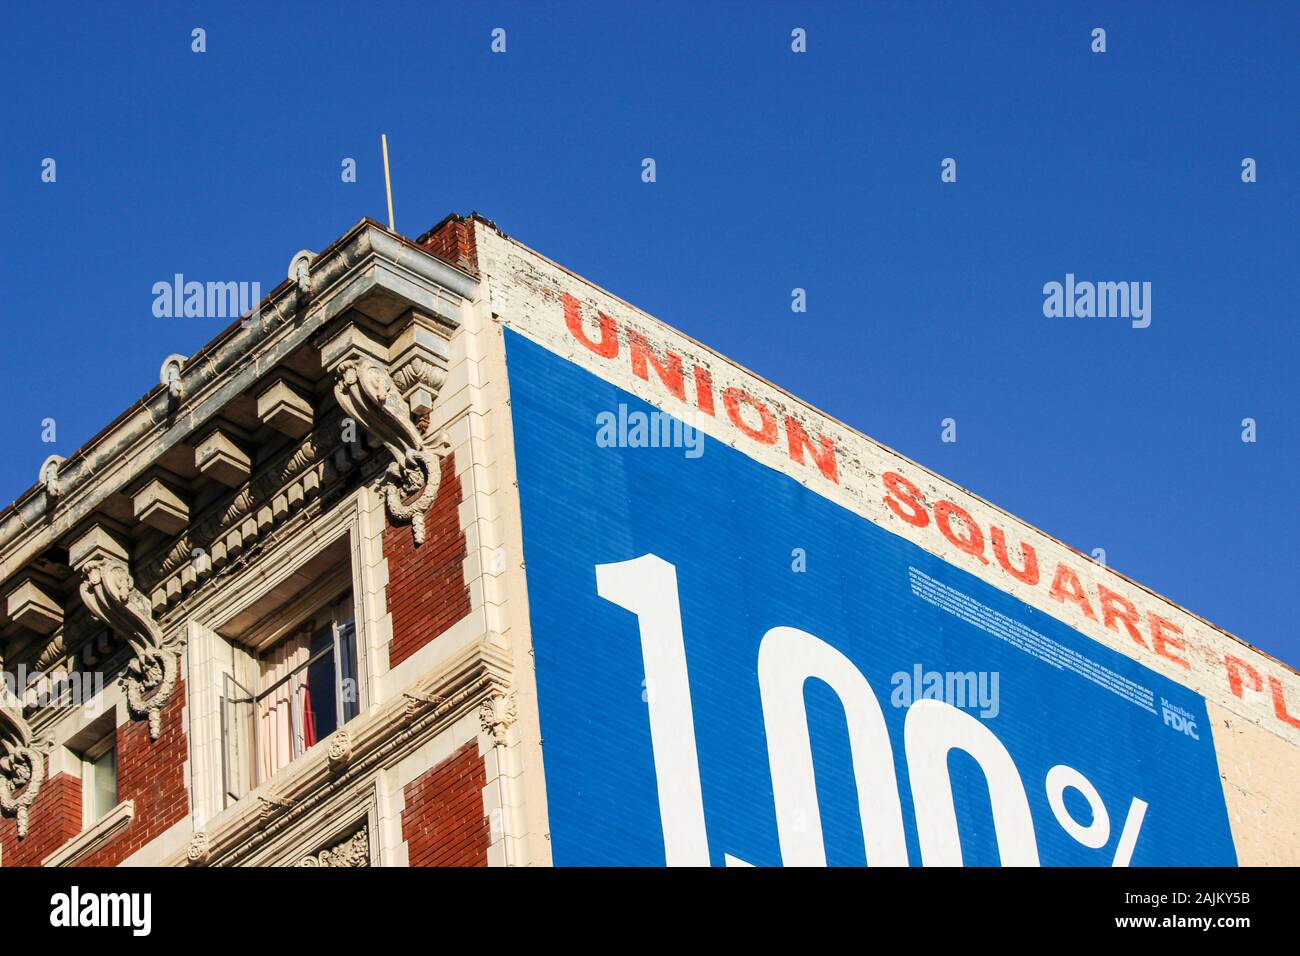 Upper corner of a hotel building against clear blue sky in Tenderloin district of San Francisco, United States of America Stock Photo